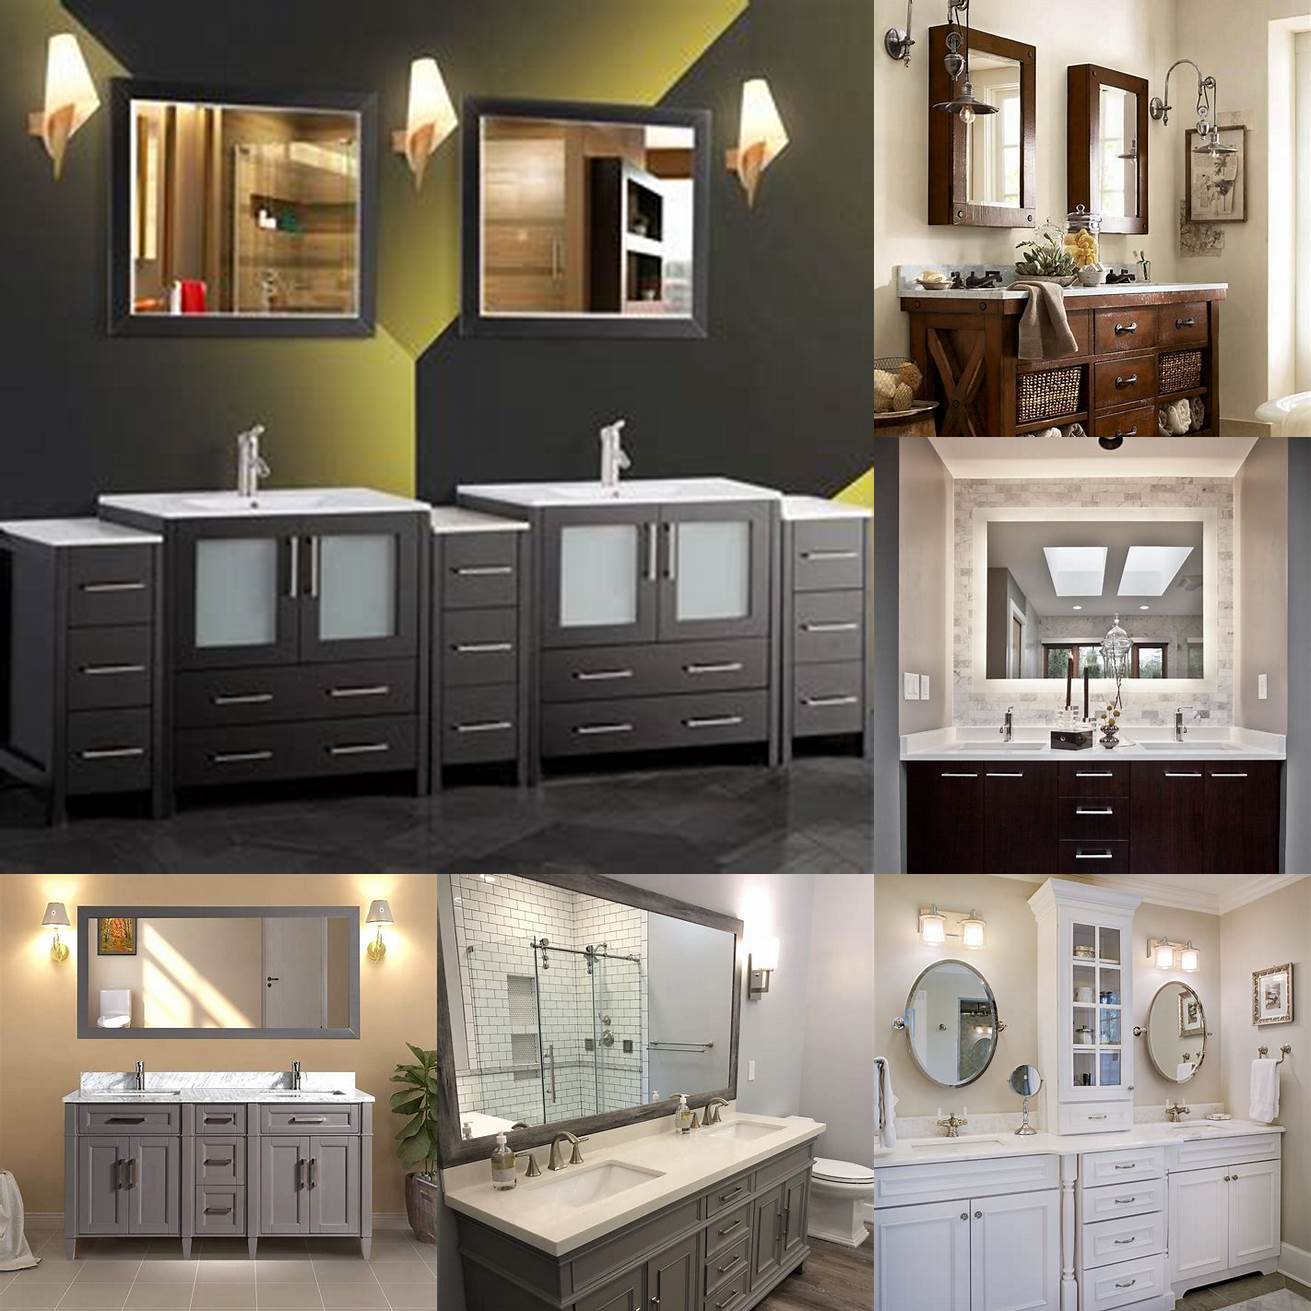 Double vanities are perfect for couples or families who share a bathroom They come in different styles and sizes and they can be made of different materials such as wood metal and glass They provide ample storage space and countertop space However they take up more floor space than other types of vanities